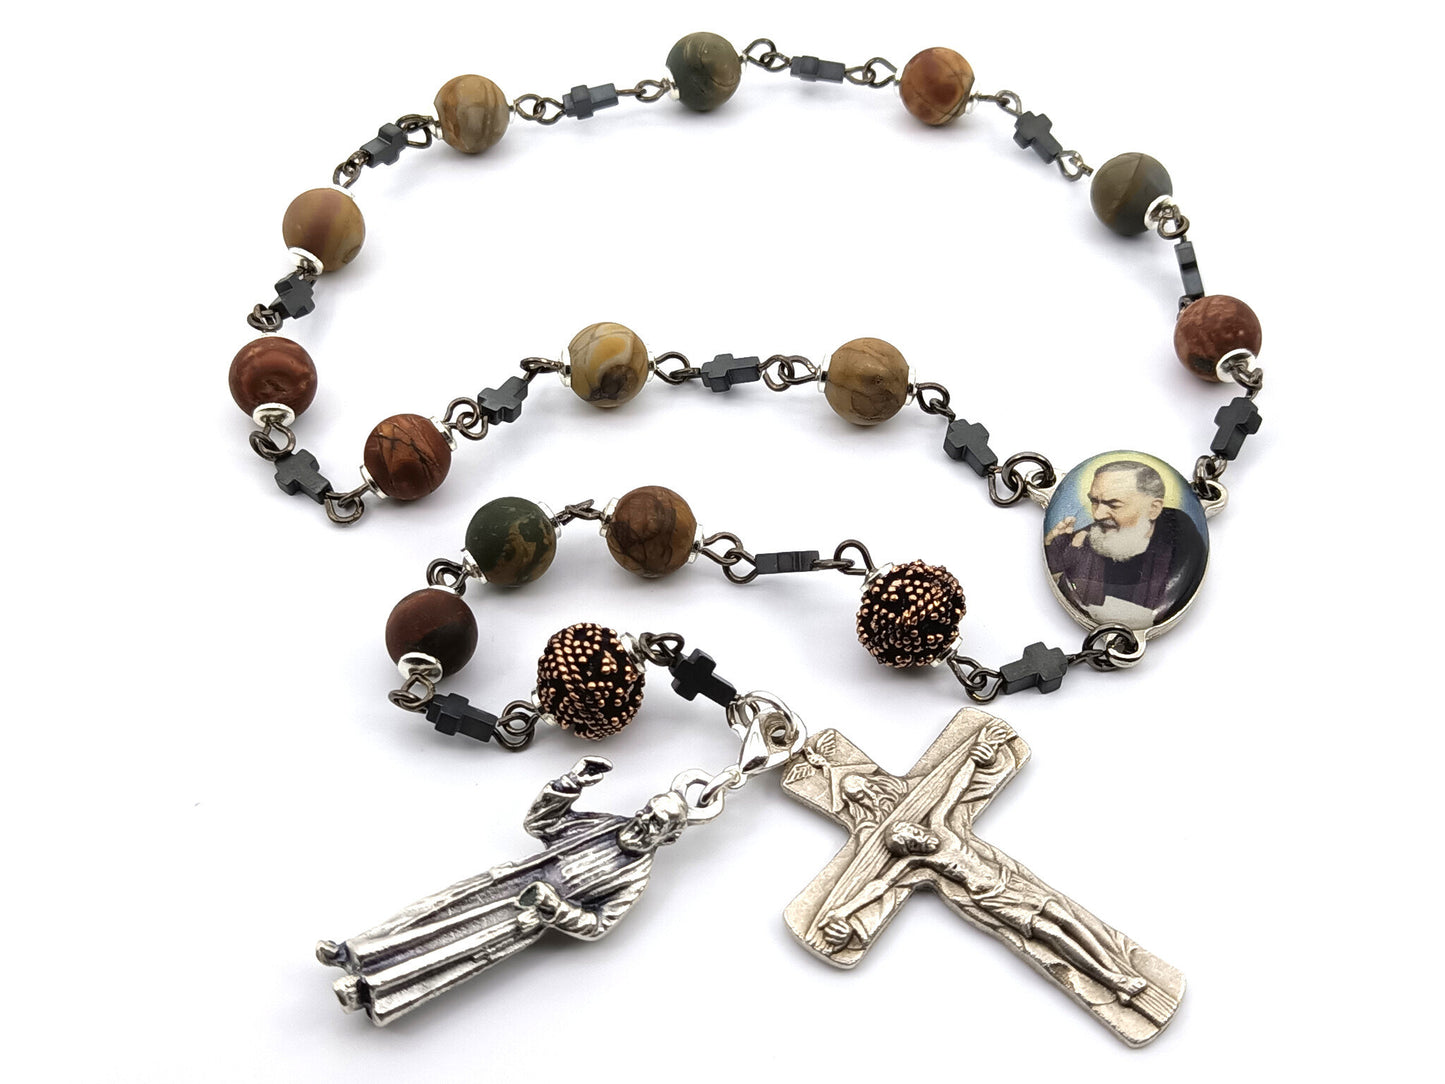 Saint Padre Pio unique rosary beads single decade rosary with gemstone and copper beads, silver Trinity crucifix and Padre Pio medal.